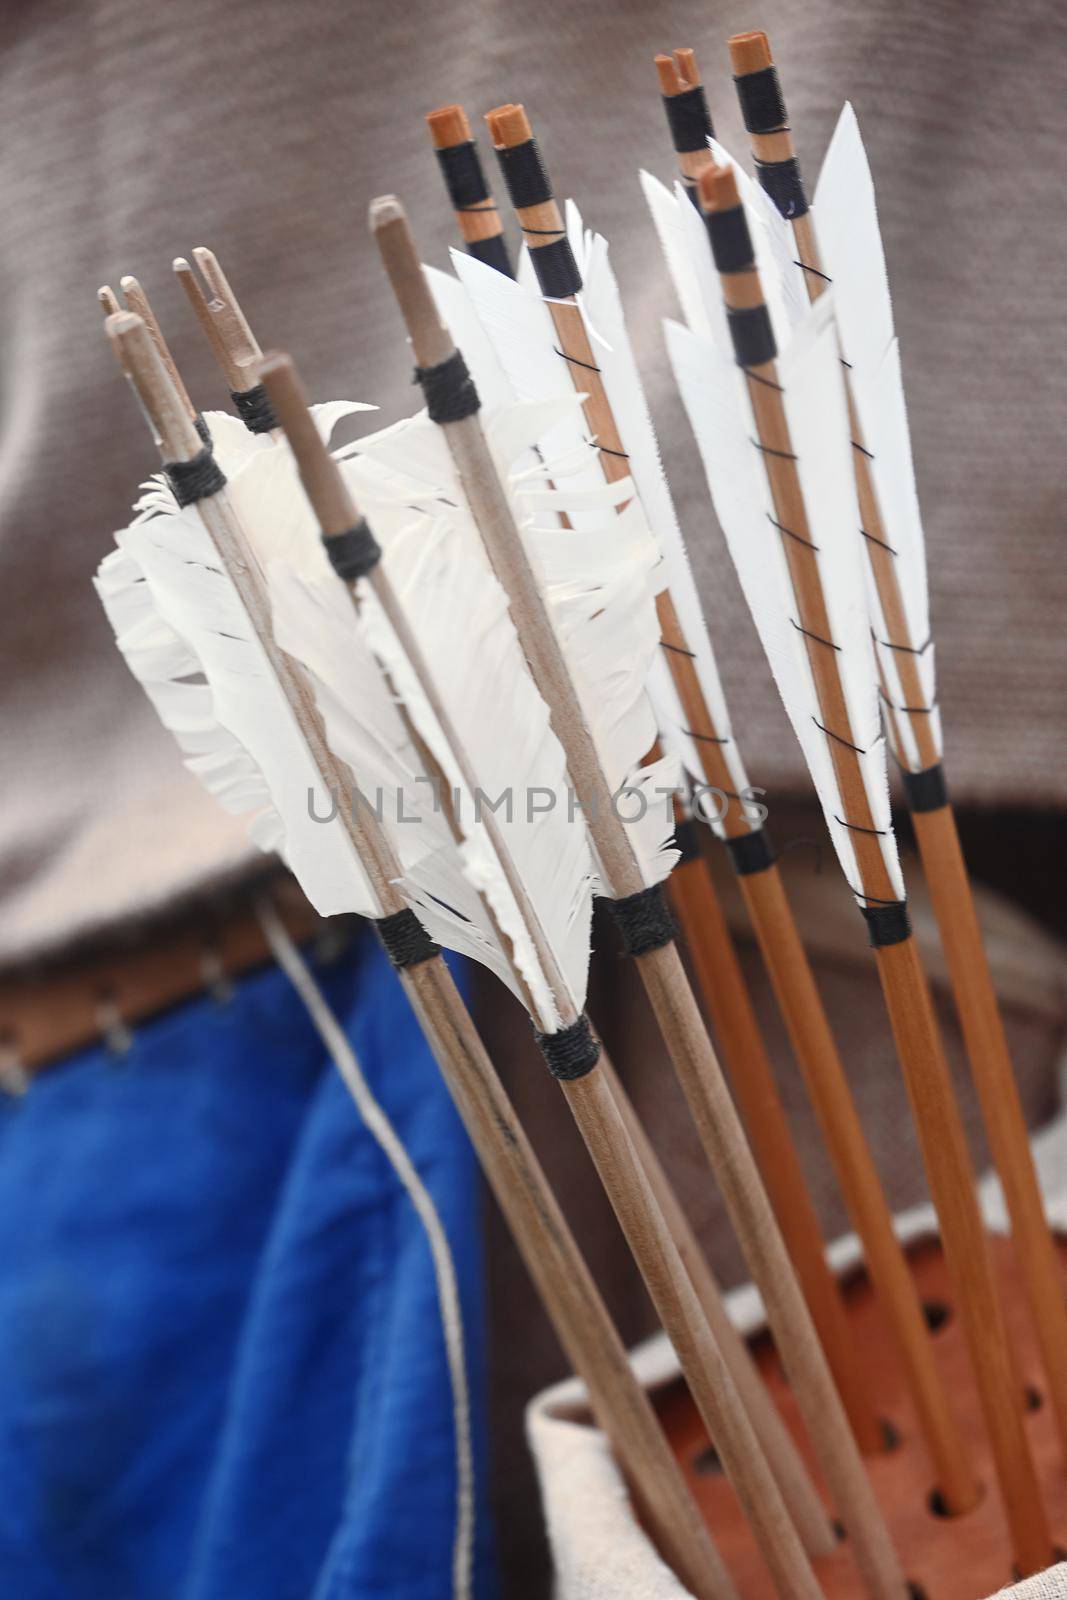 Wooden arrows for the bow. Hand crafted arrows in medieval style. Arrows with feather plumage in archer's quiver. Historical reconstruction - arrows for the bow. Medieval set of archer.